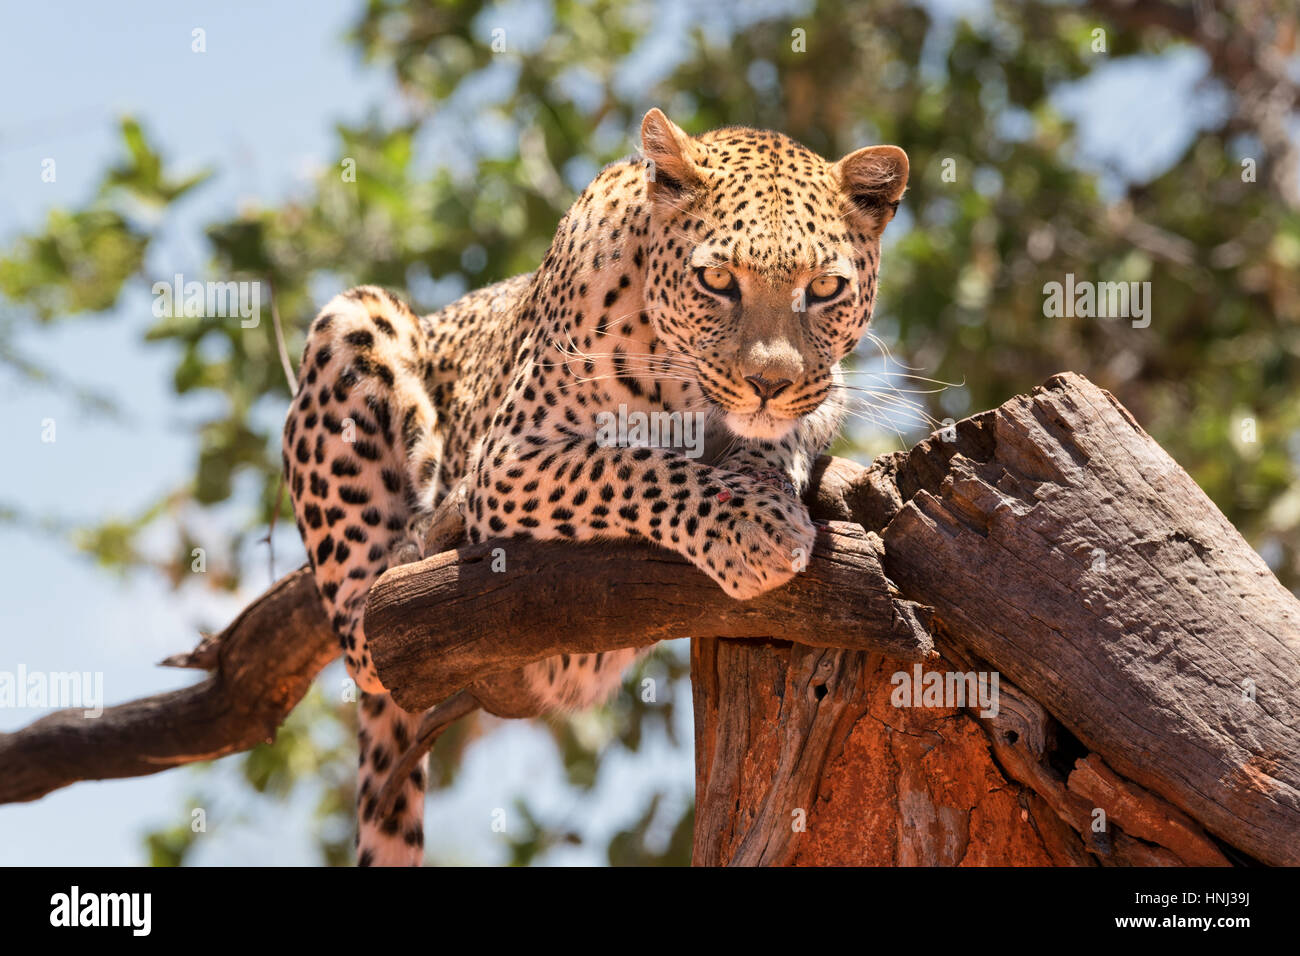 A Leopard resting in an elevated position, staring down towards the camera, in Namibia. Stock Photo